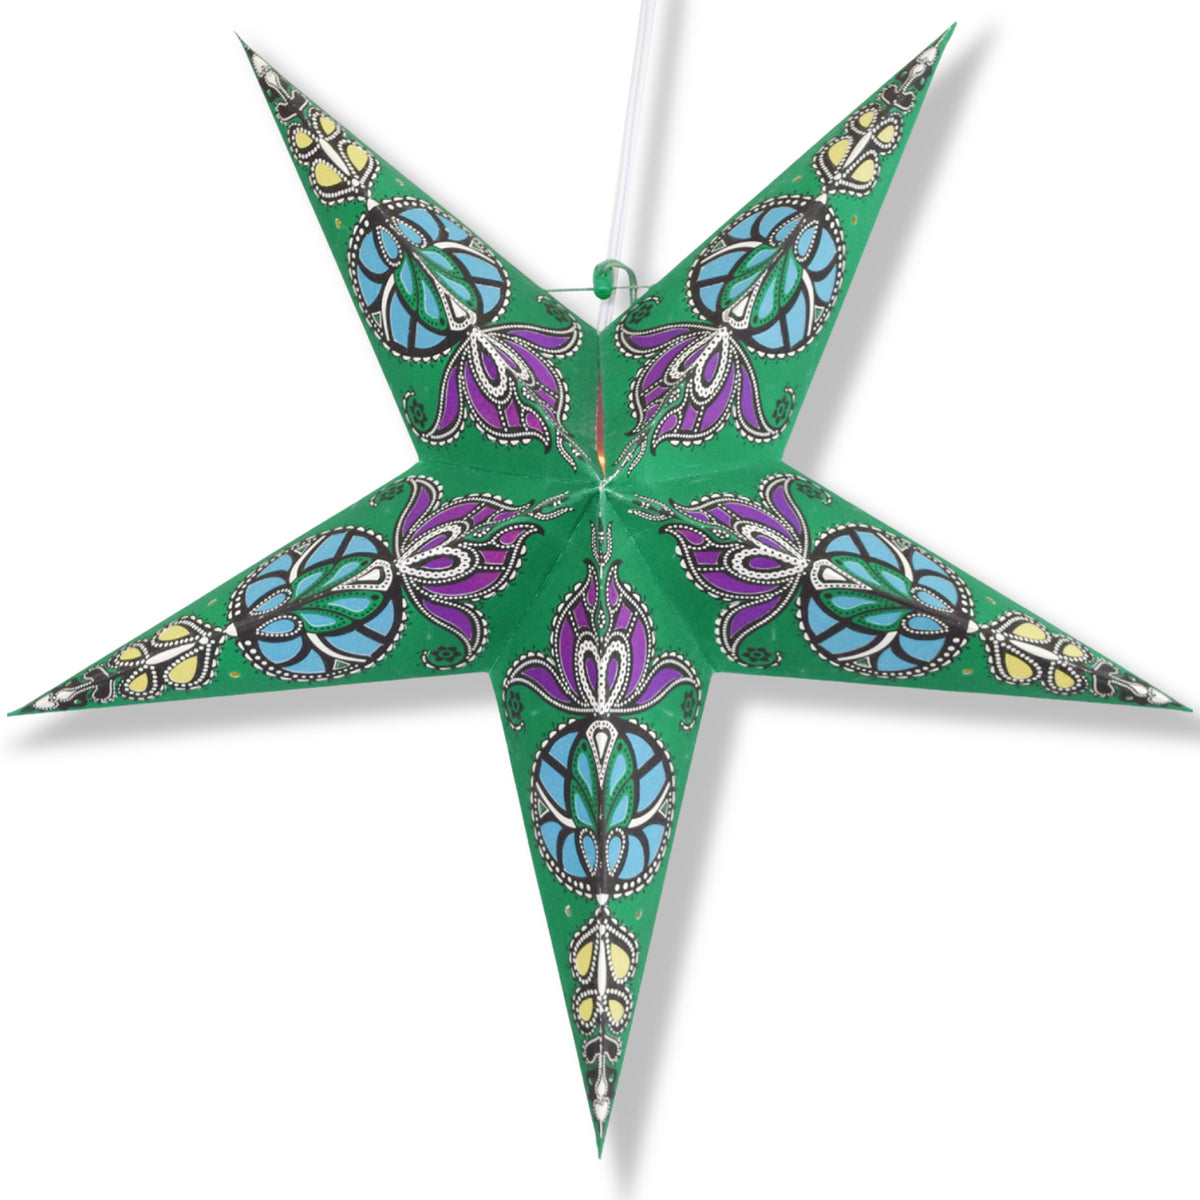 24" Green Neptune Paper Star Lantern, Chinese Hanging Wedding & Party Decoration